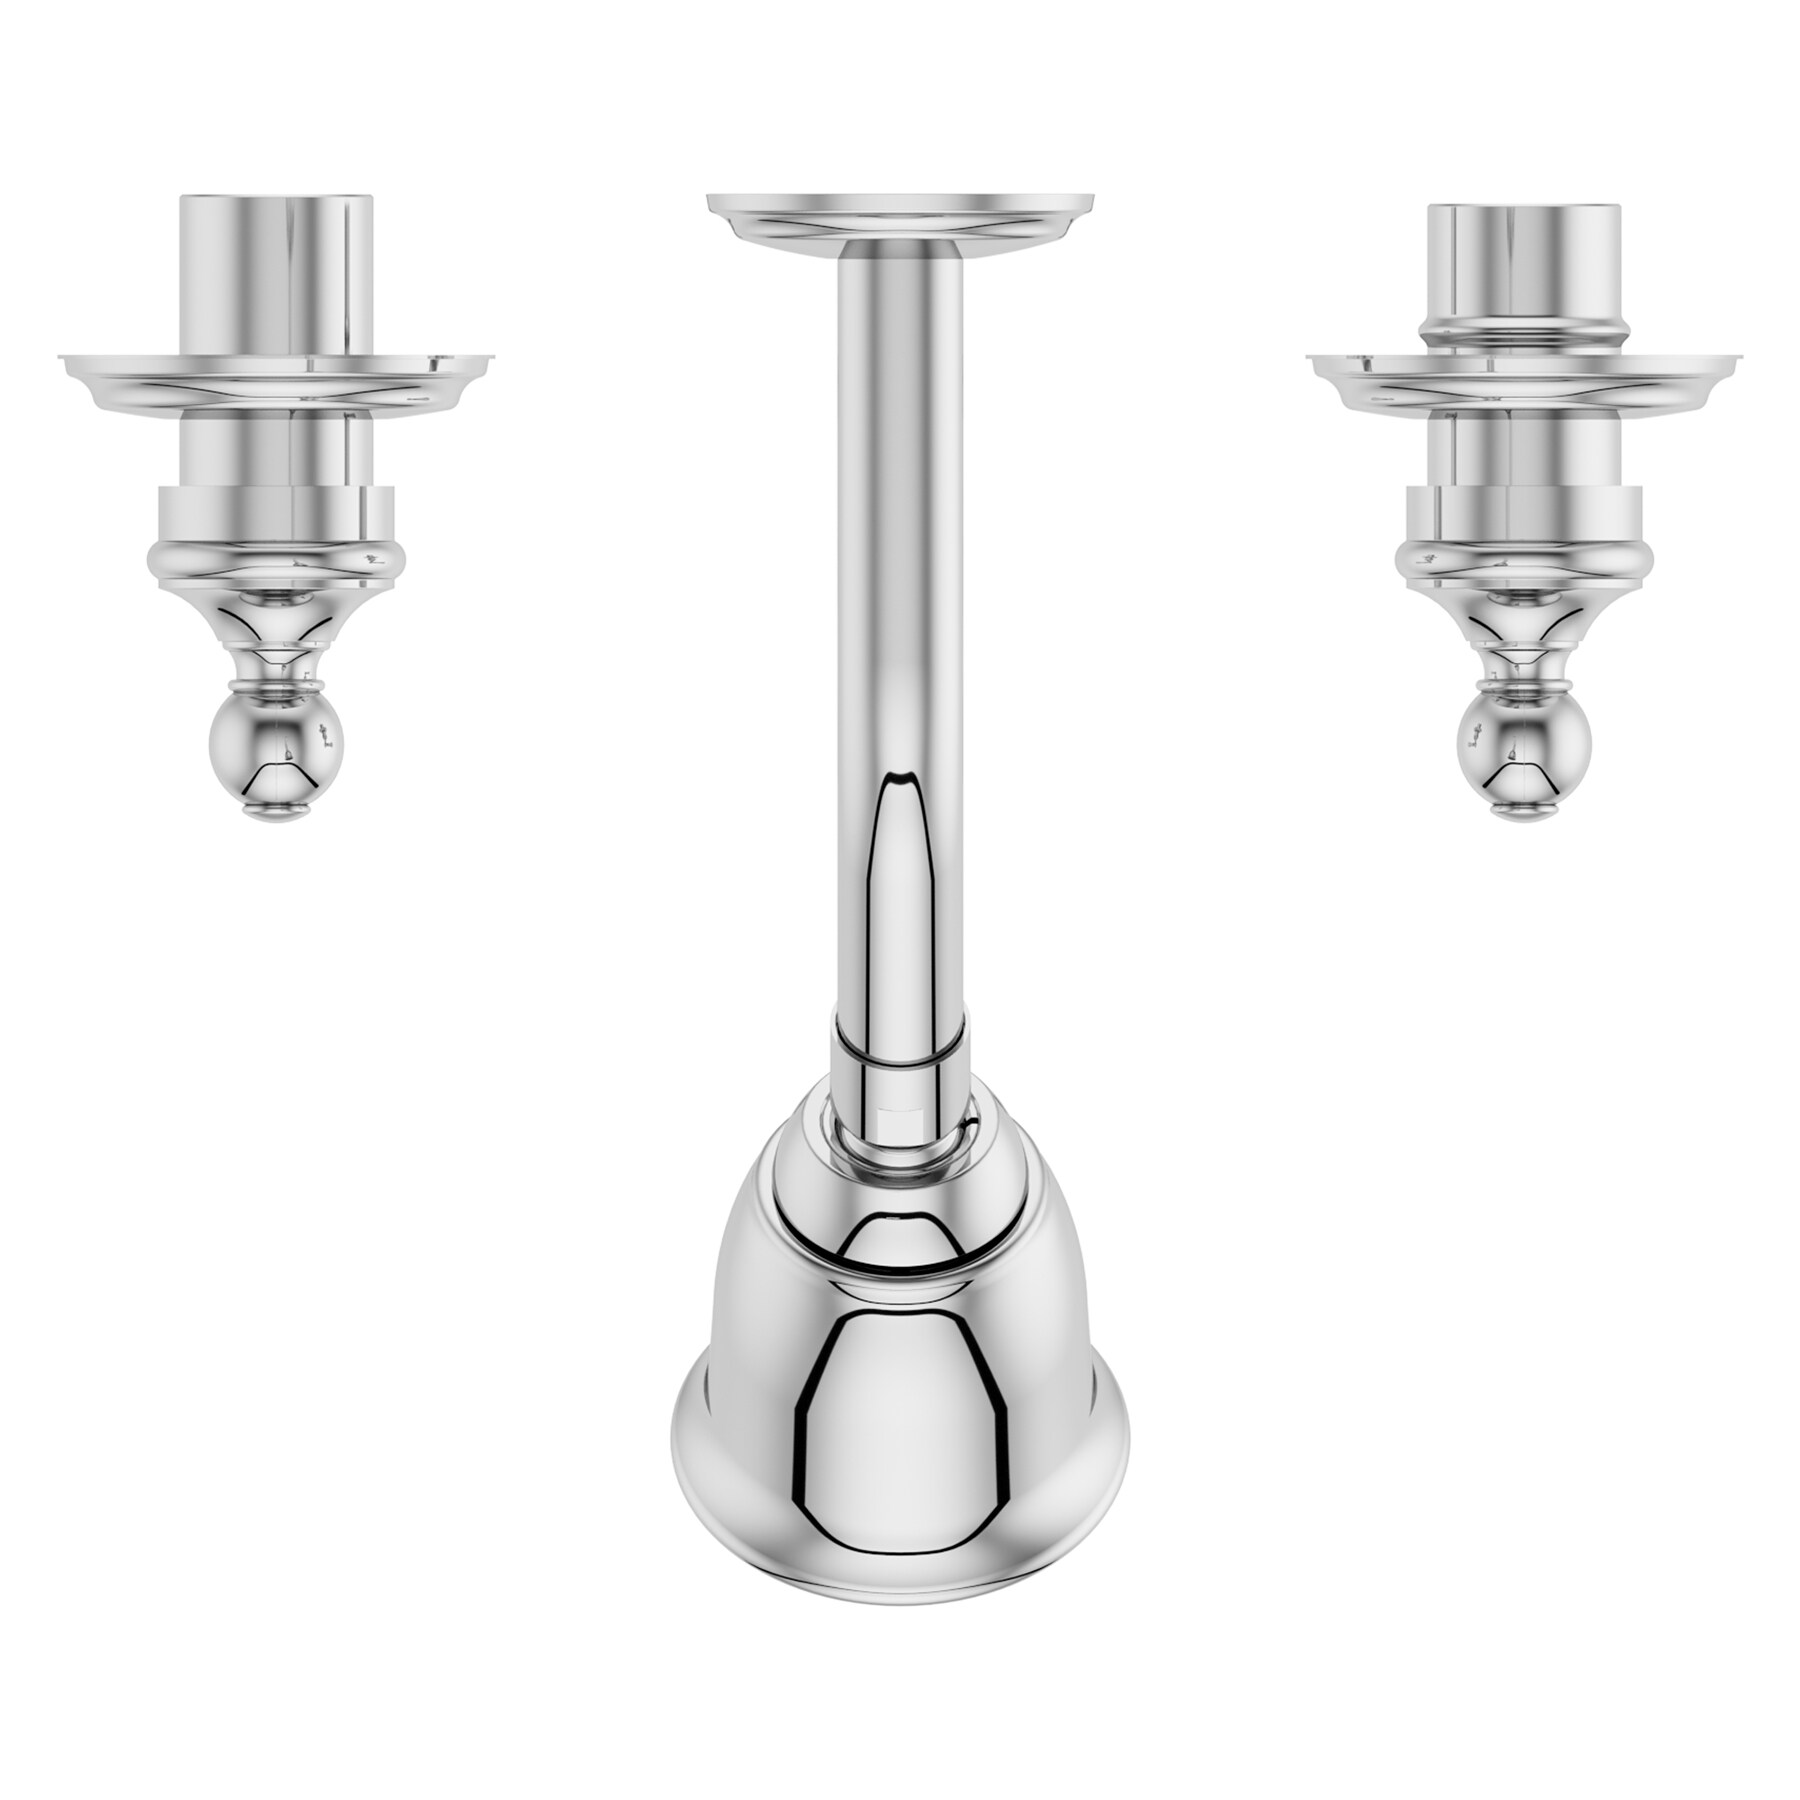 Pfister Polished Chrome 2-handle Shower Faucet Valve Included